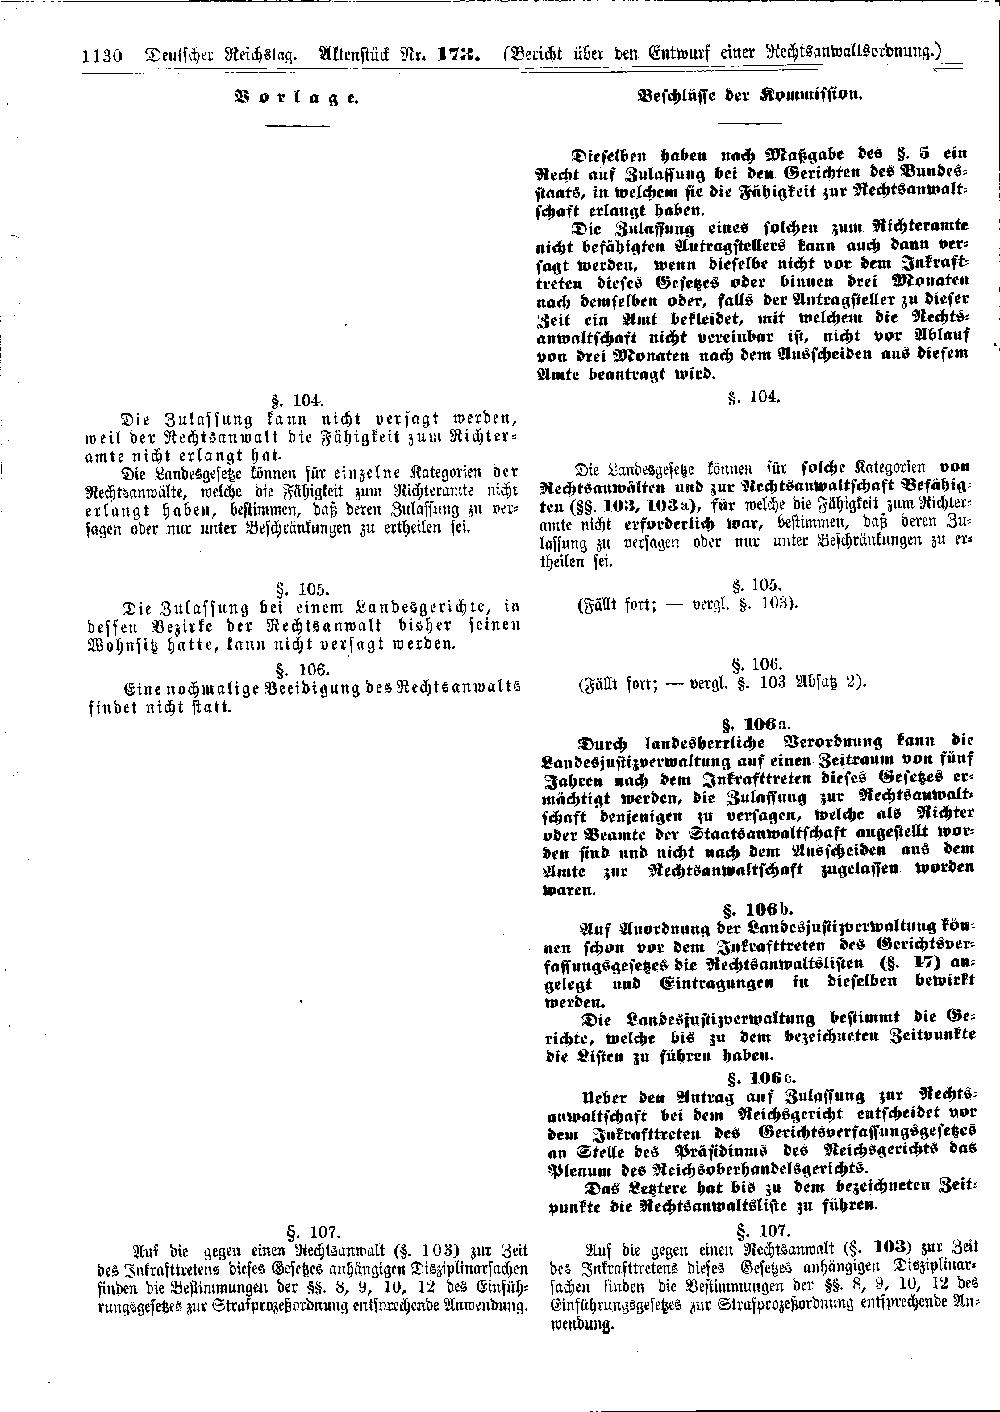 Scan of page 1130